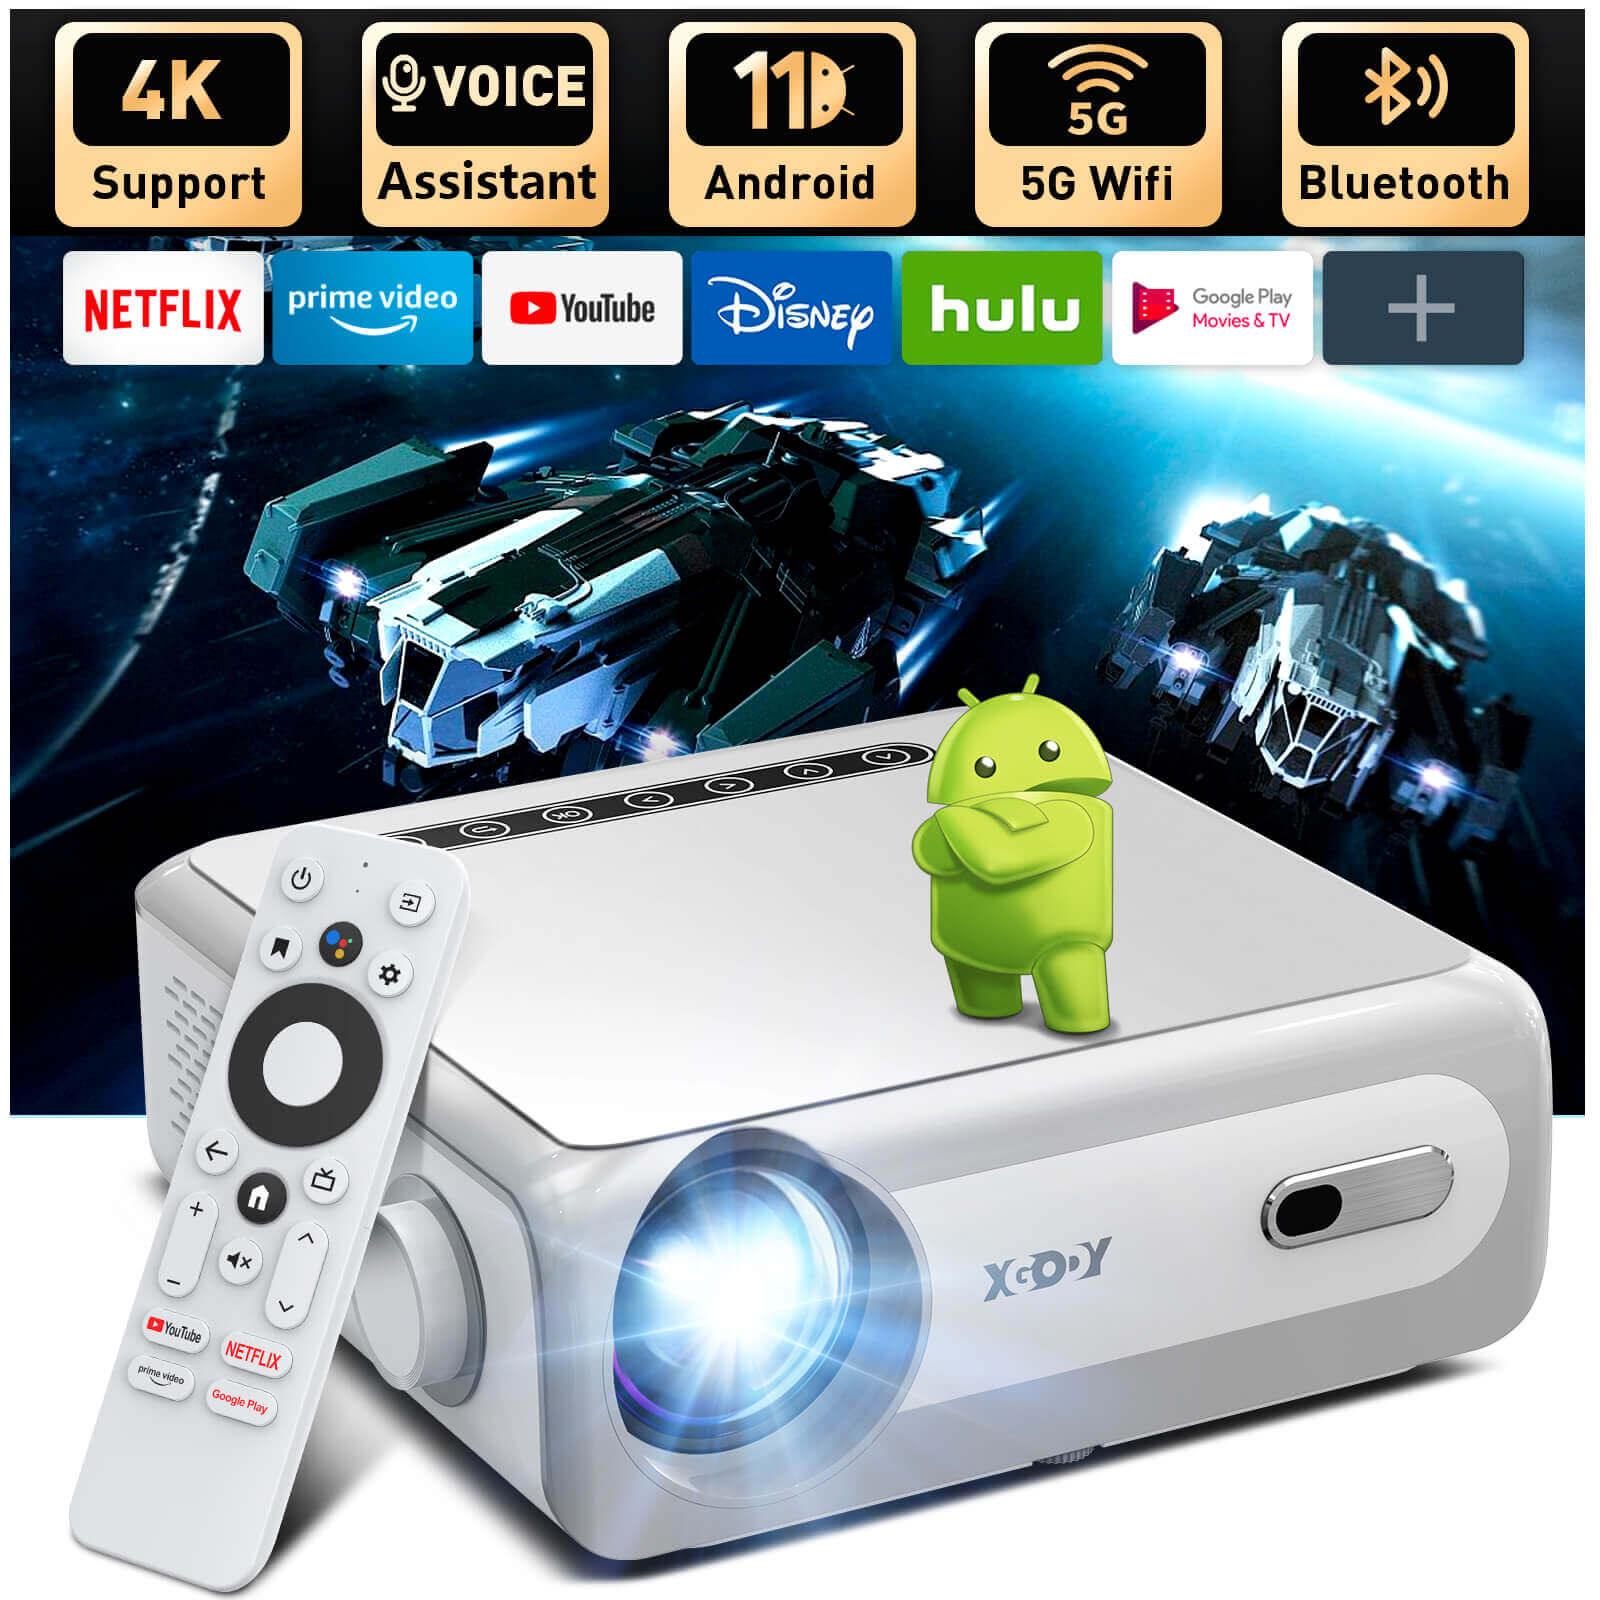 Cost-effective and Most worthwhile XGODY 4K Portable Smart Projector With Built-in Apps, Built-In TV Stick All-In-One Projector - XGODY 